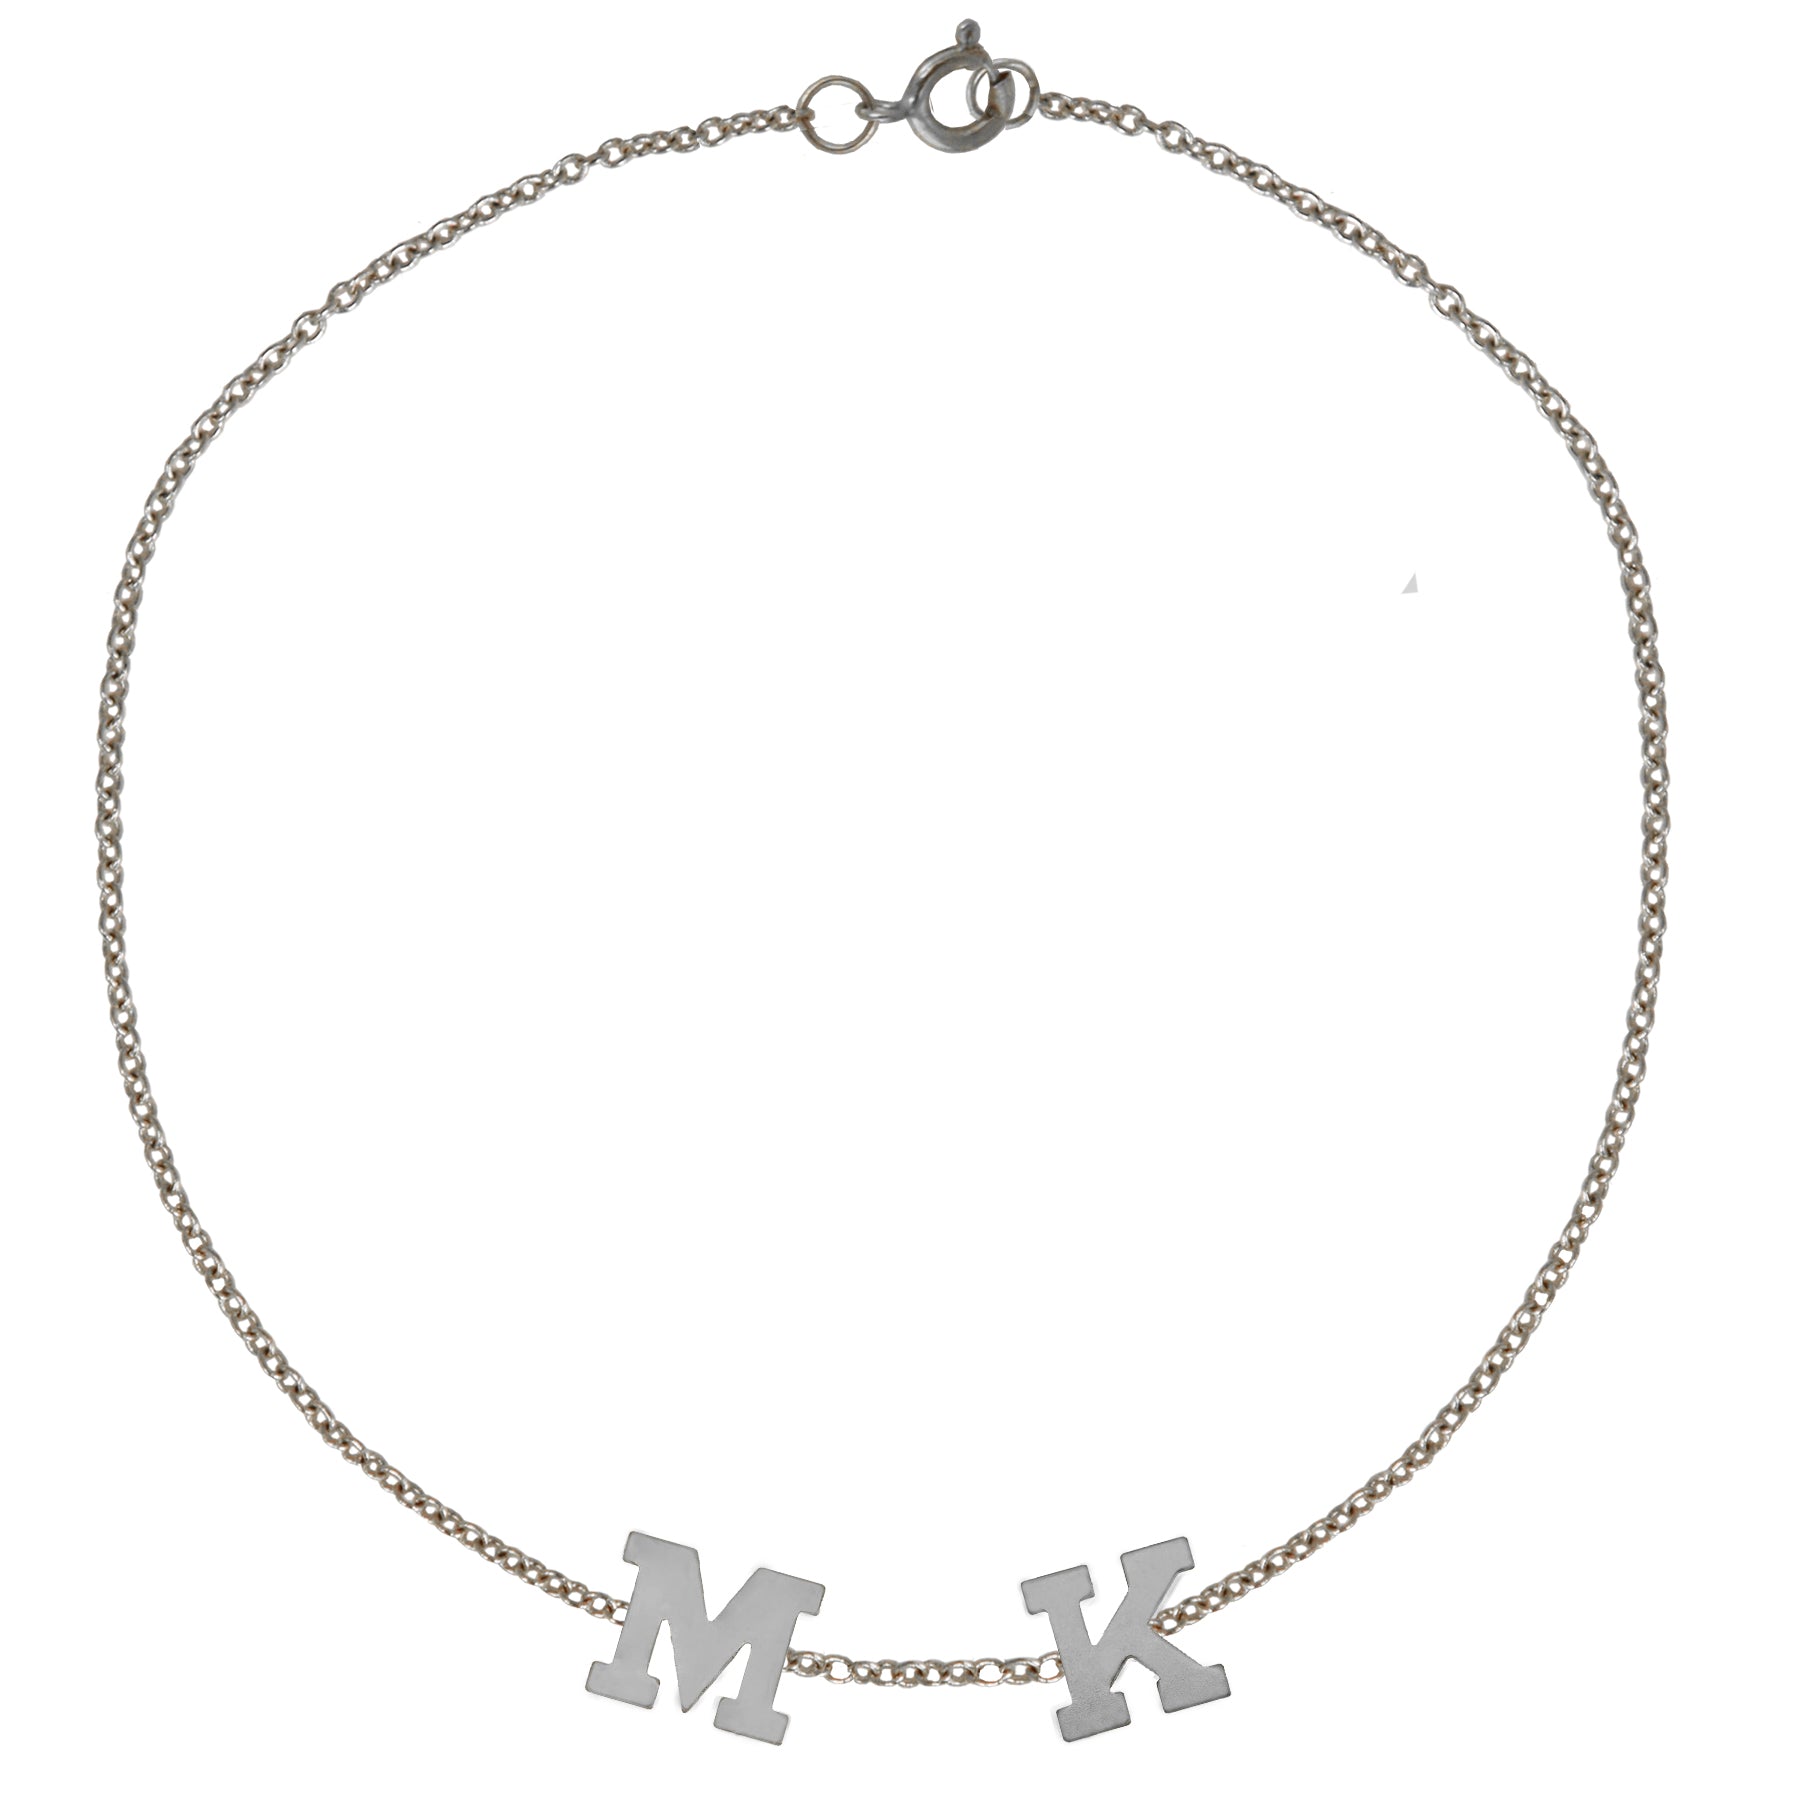 Gold Initial Bracelet - Three initials White Gold